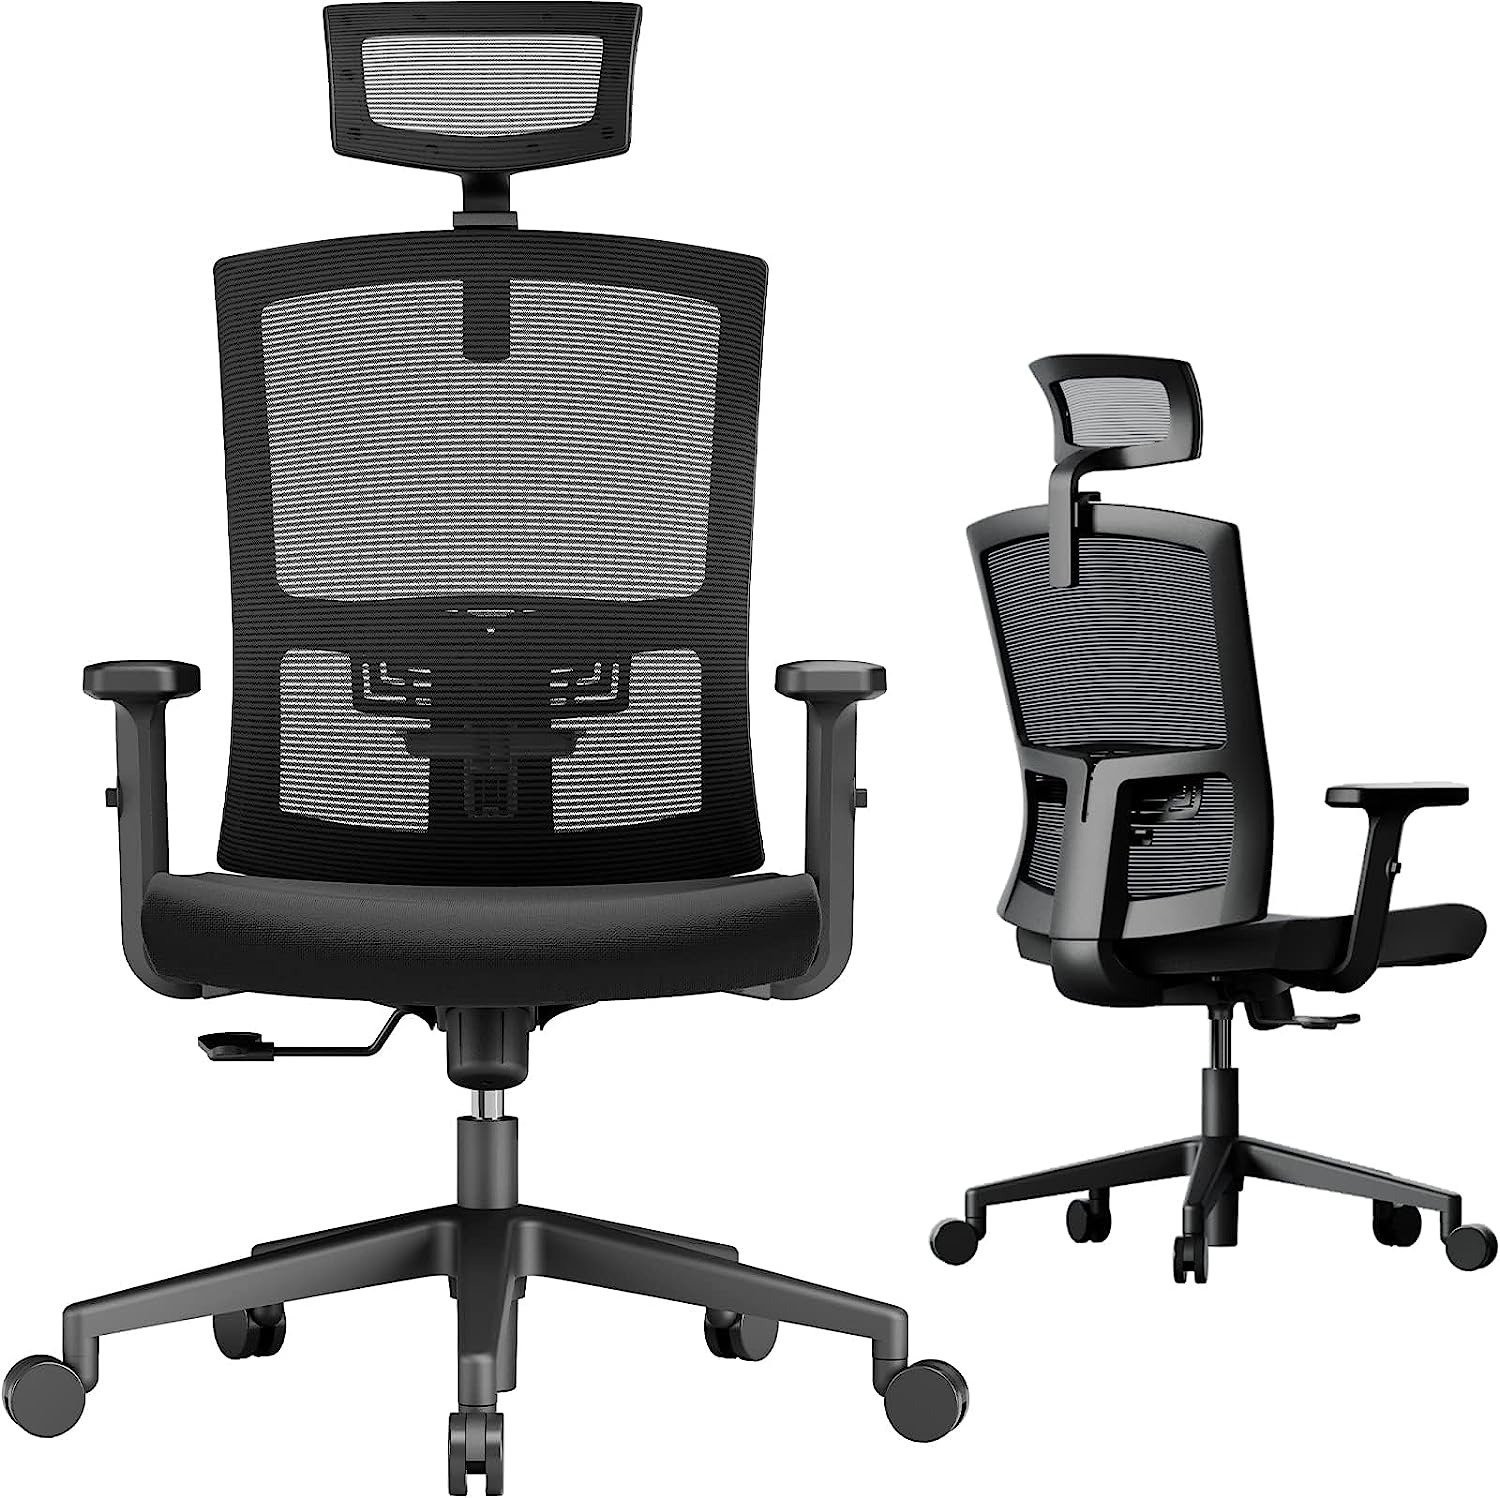 NOBLEWELL Ergonomic Office Chair w/ 2'' Adjustable Lumbar Support $75.29 + Free Shipping